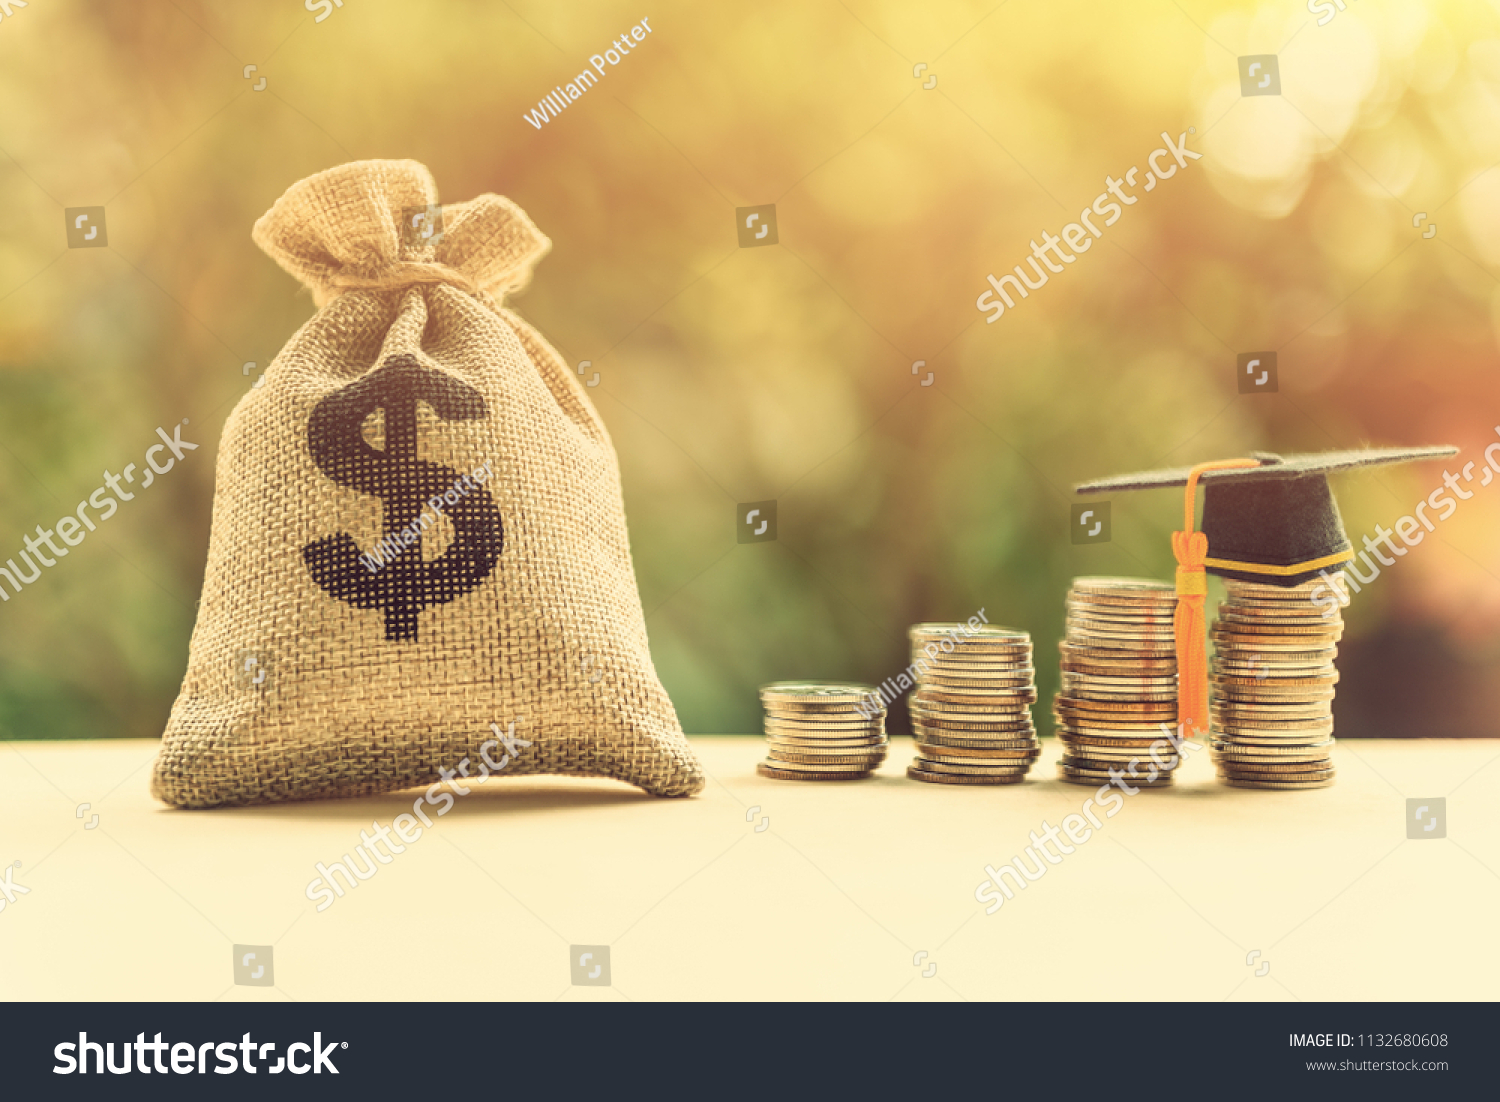 Money cost saving for goal and success in school, education concept : US dollar / cash in hemp bags or burlap sacks, a graduation cap or hat on highest row of coins, depicts final study or achievement #1132680608